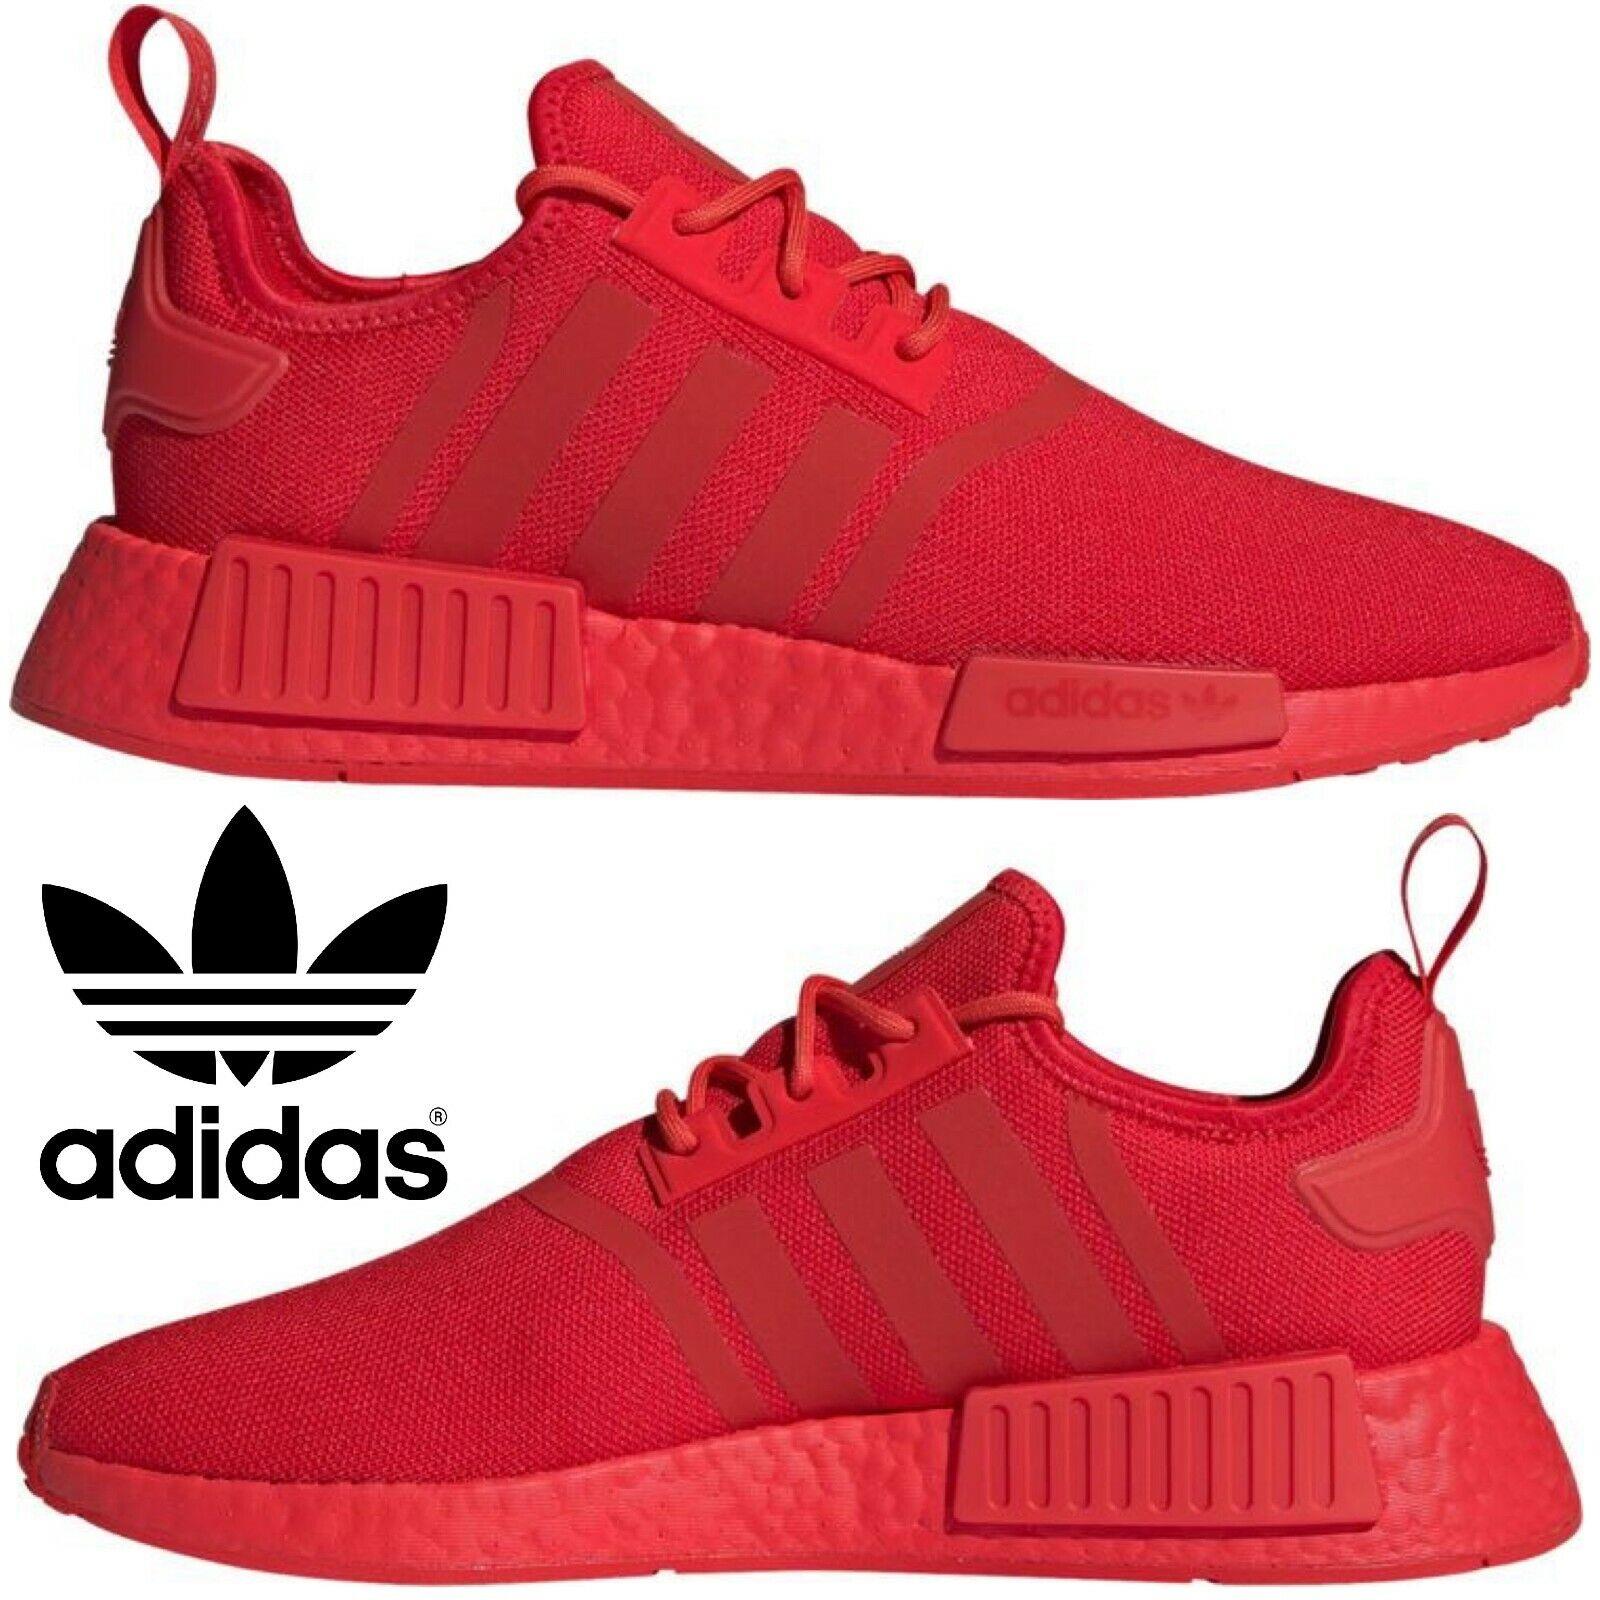 Adidas Originals Nmd R1 Men`s Sneakers Running Shoes Gym Casual Sport Red - Red , RED Manufacturer